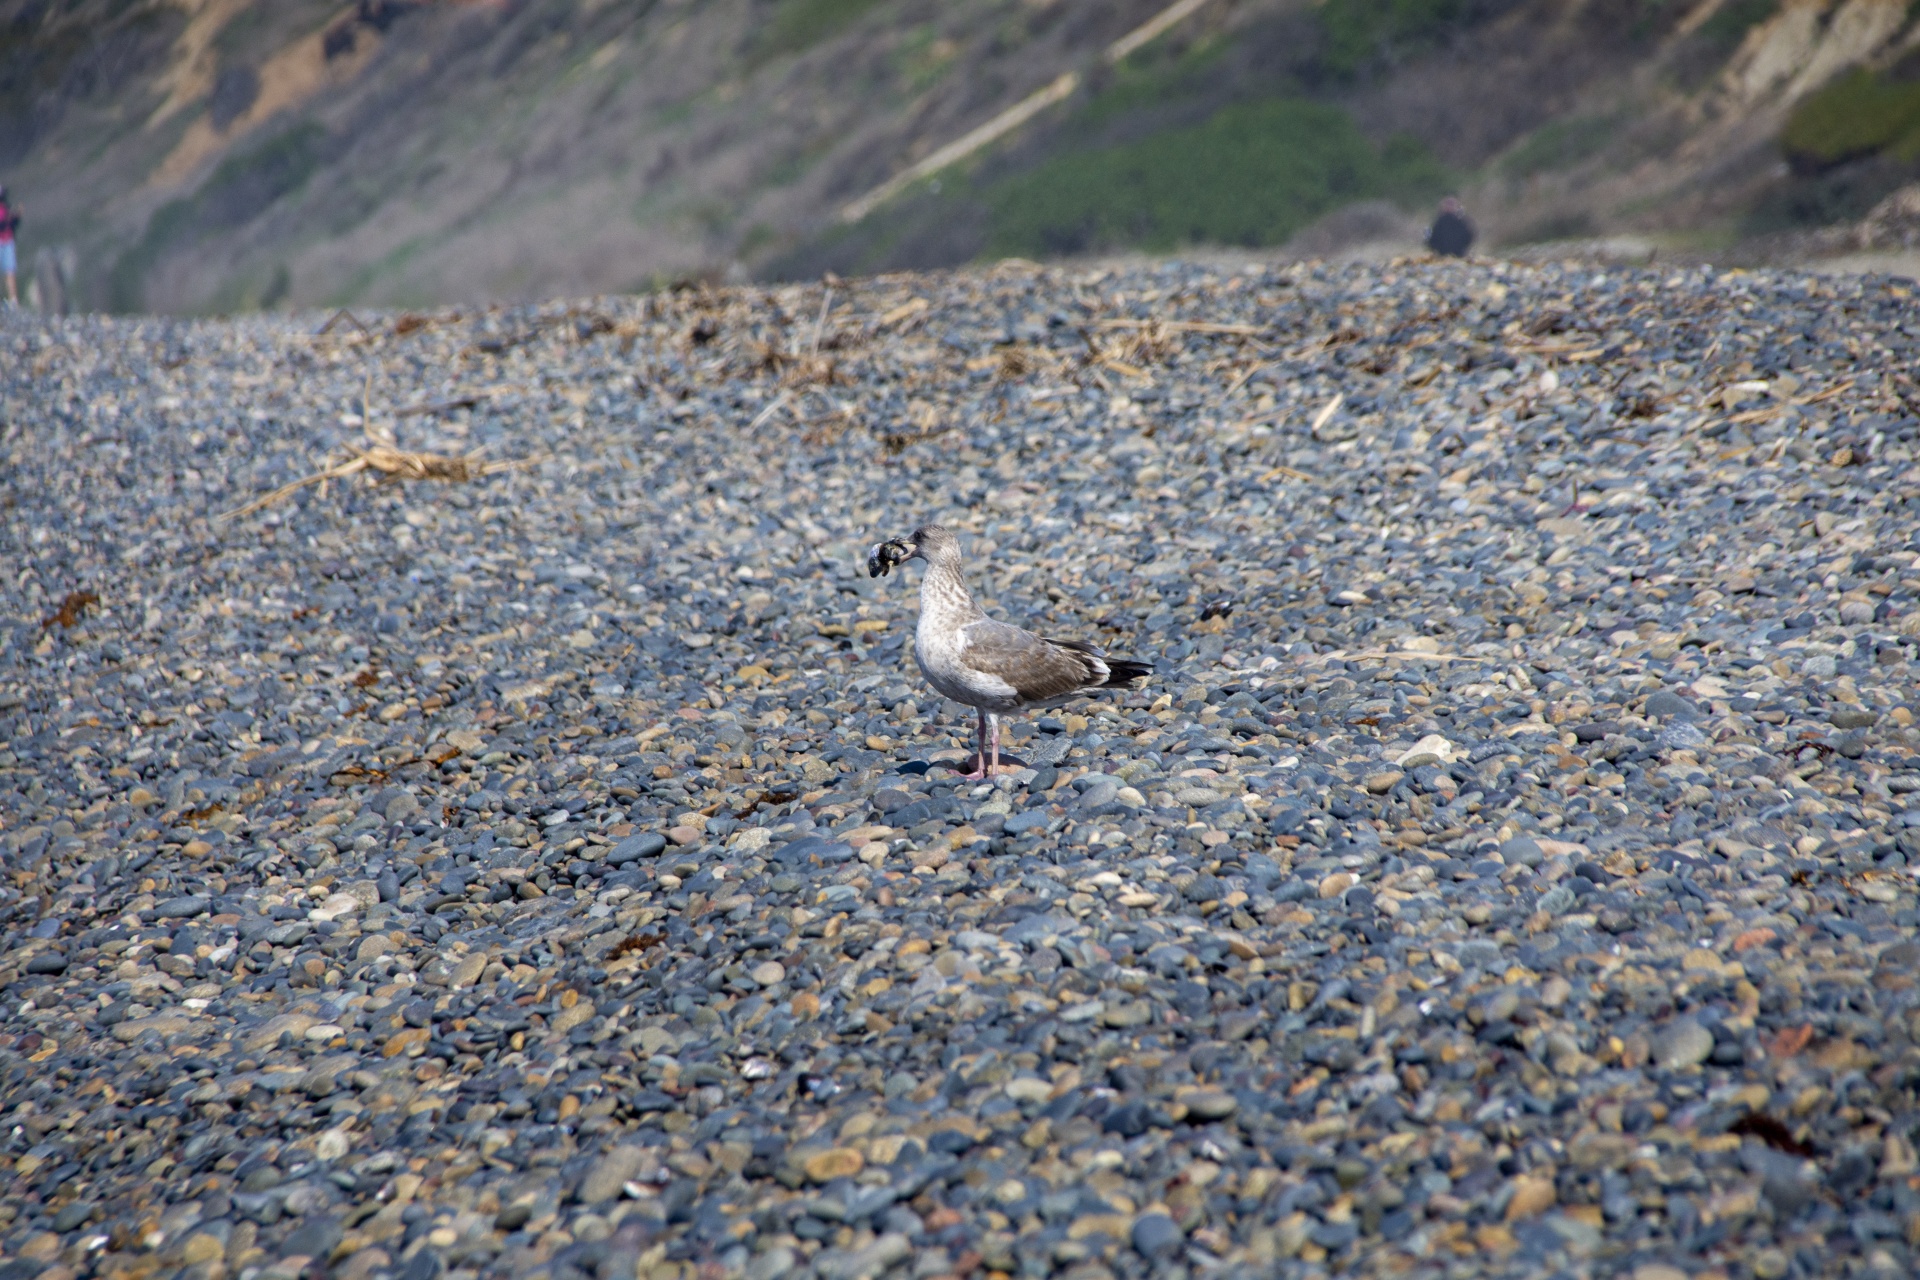 Seagull With Mussels In Its Beak